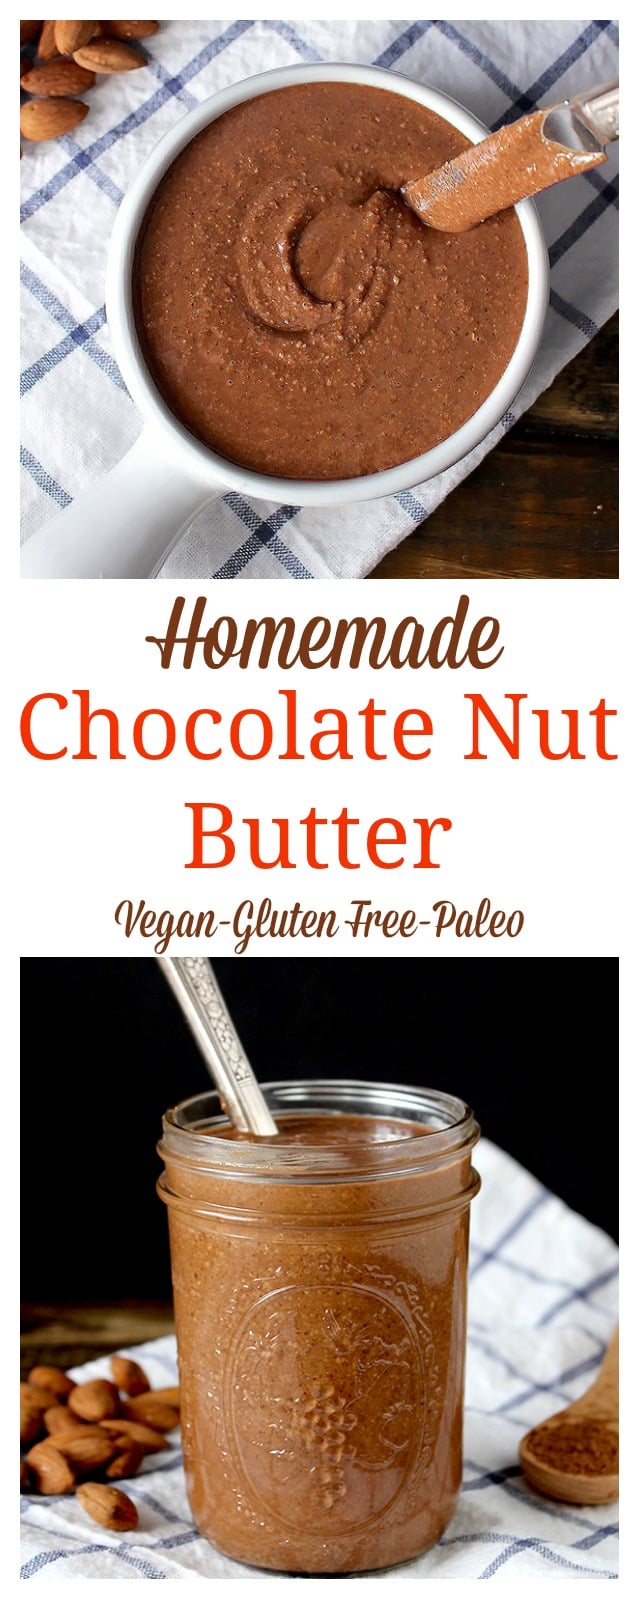 Chocolate Nut Butter 